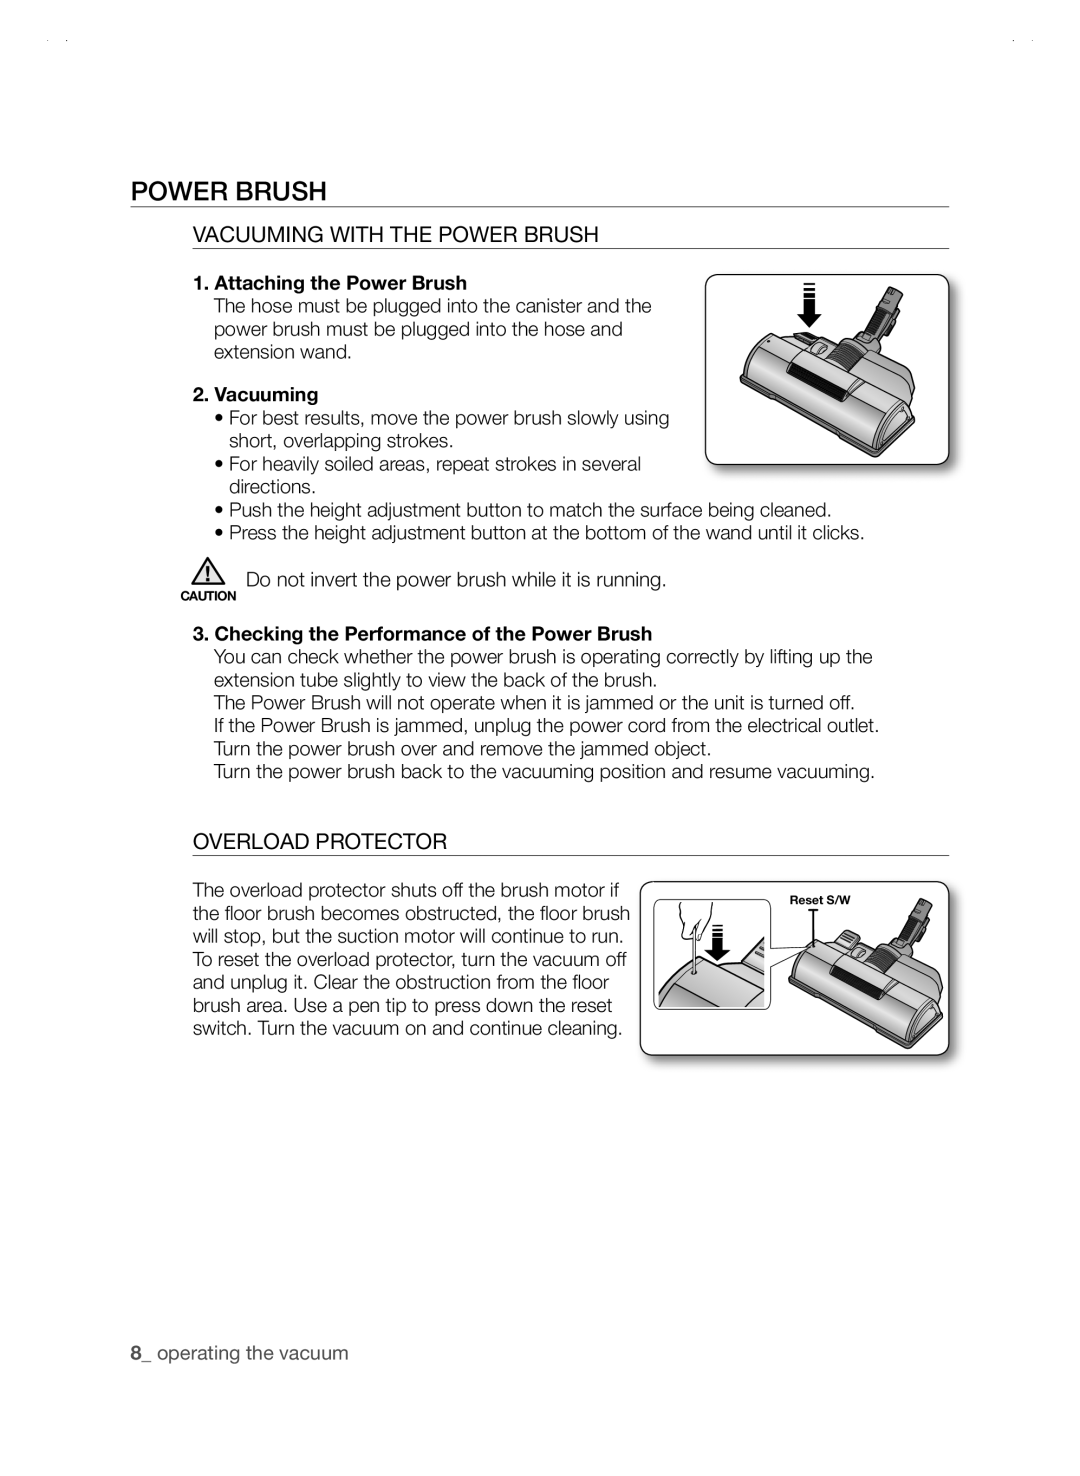 Samsung SC88P user manual power BRUSH, Vacuuming With The Power Brush, Overload Protector, Attaching the Power Brush 